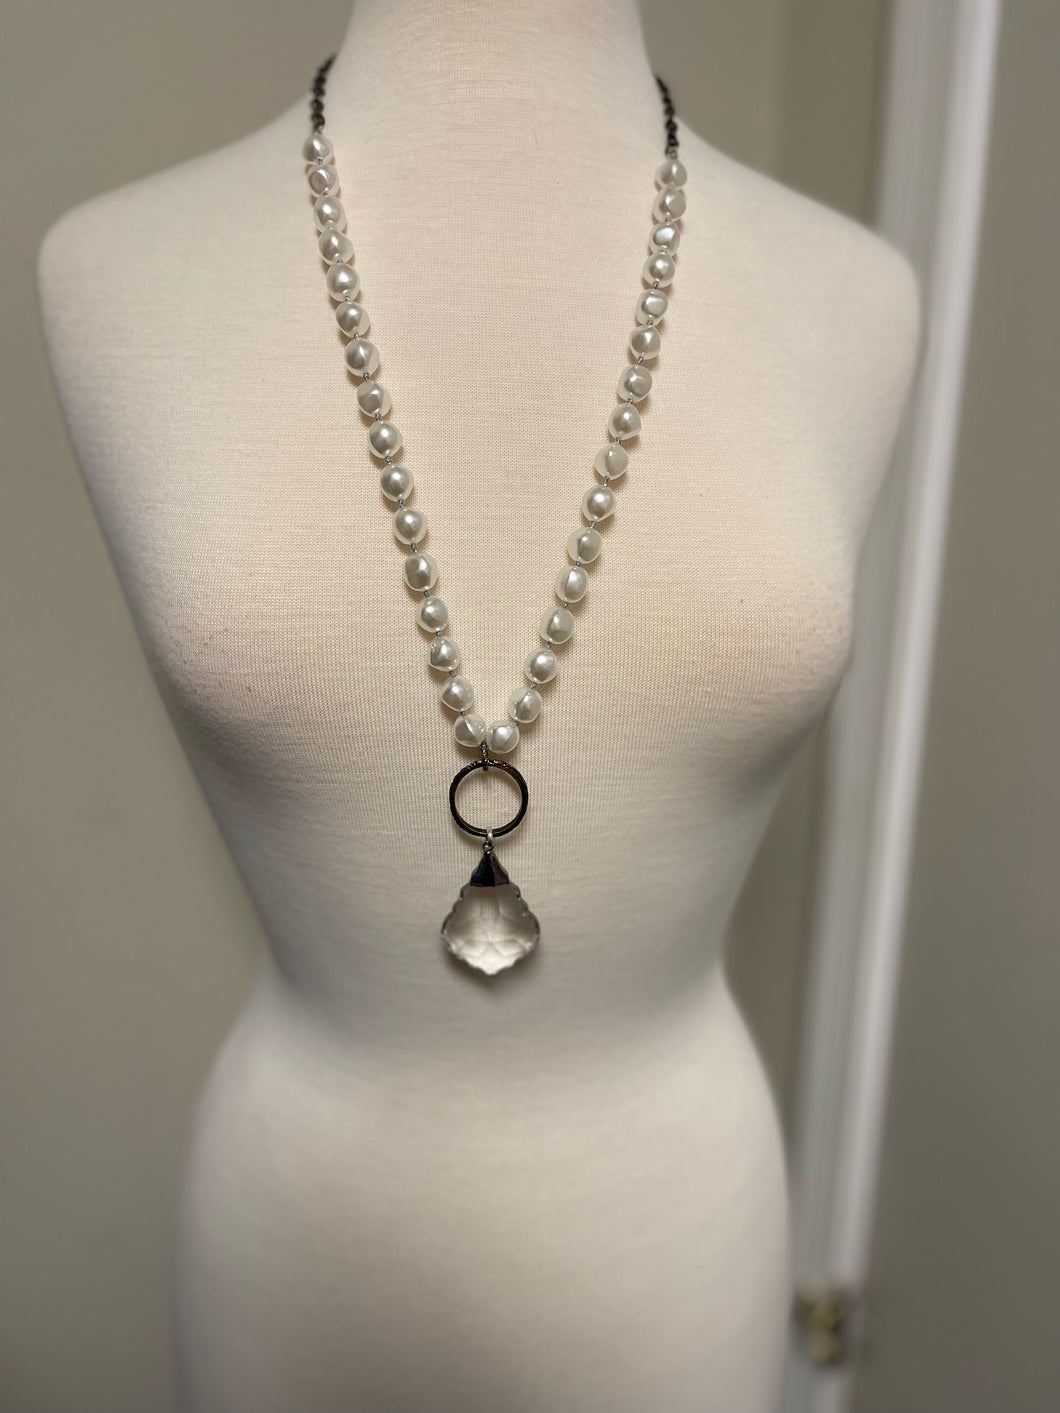 Knotted Pearl and Chain with Pendant Necklace  Lost & Found Trading Co.   